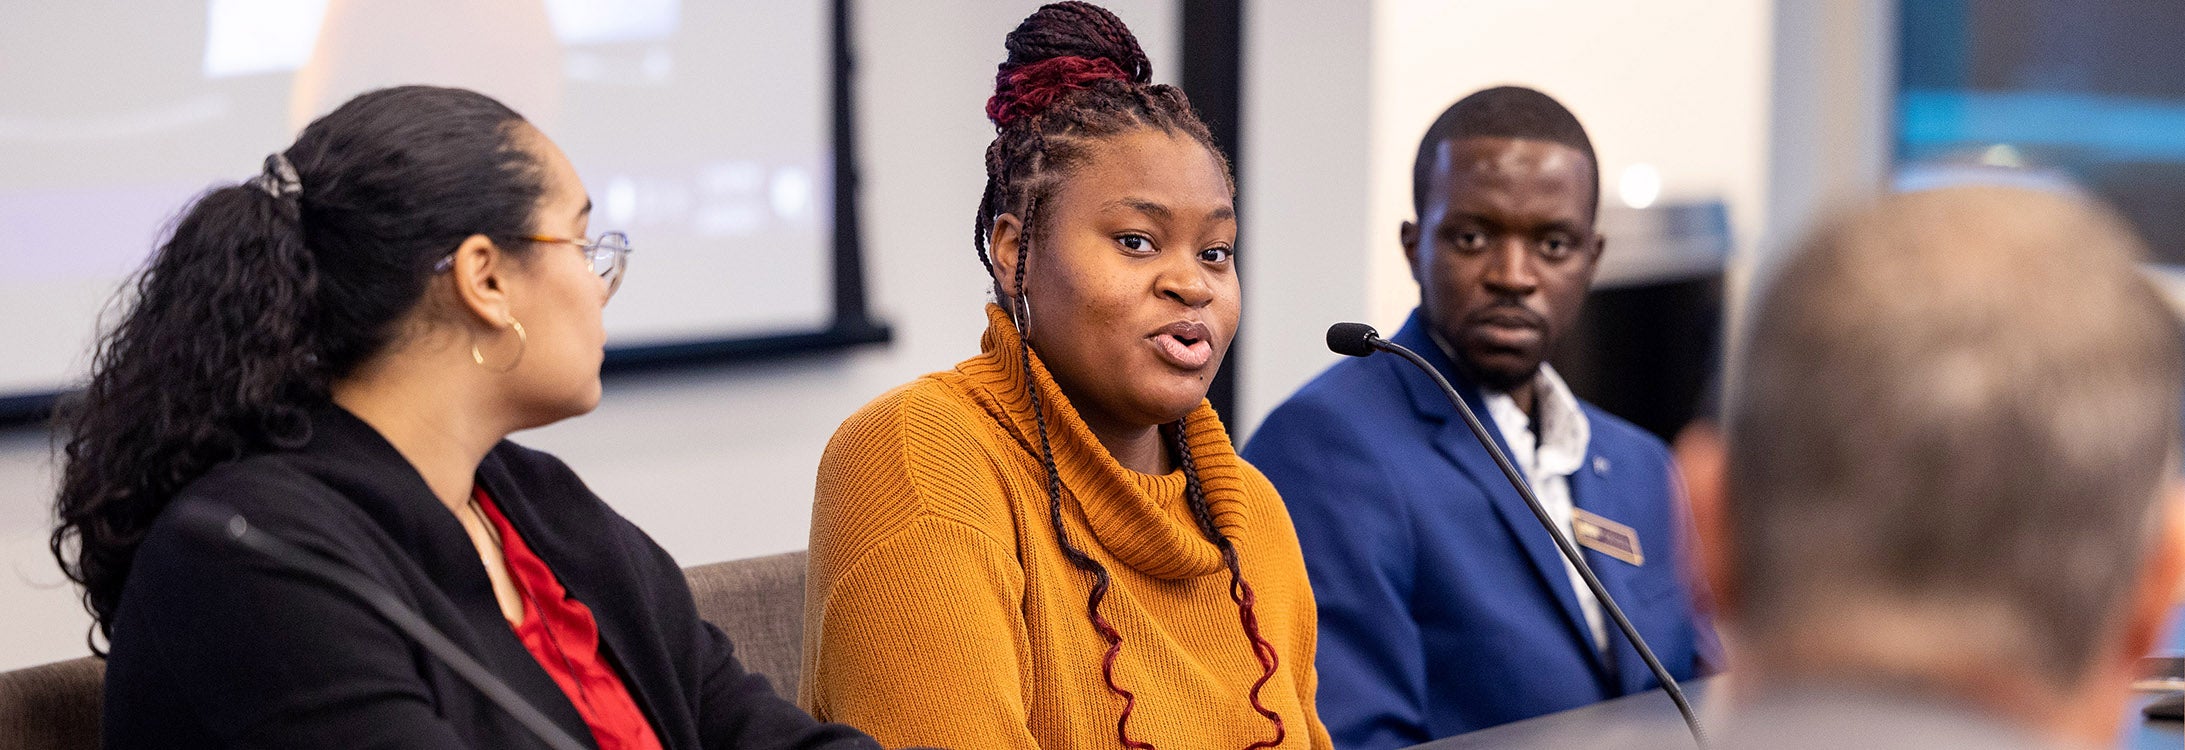 Student Iyaira Williams discusses her involvement with the Purple Pantry during the East Carolina University's February Board of Trustees meeting on Thursday.